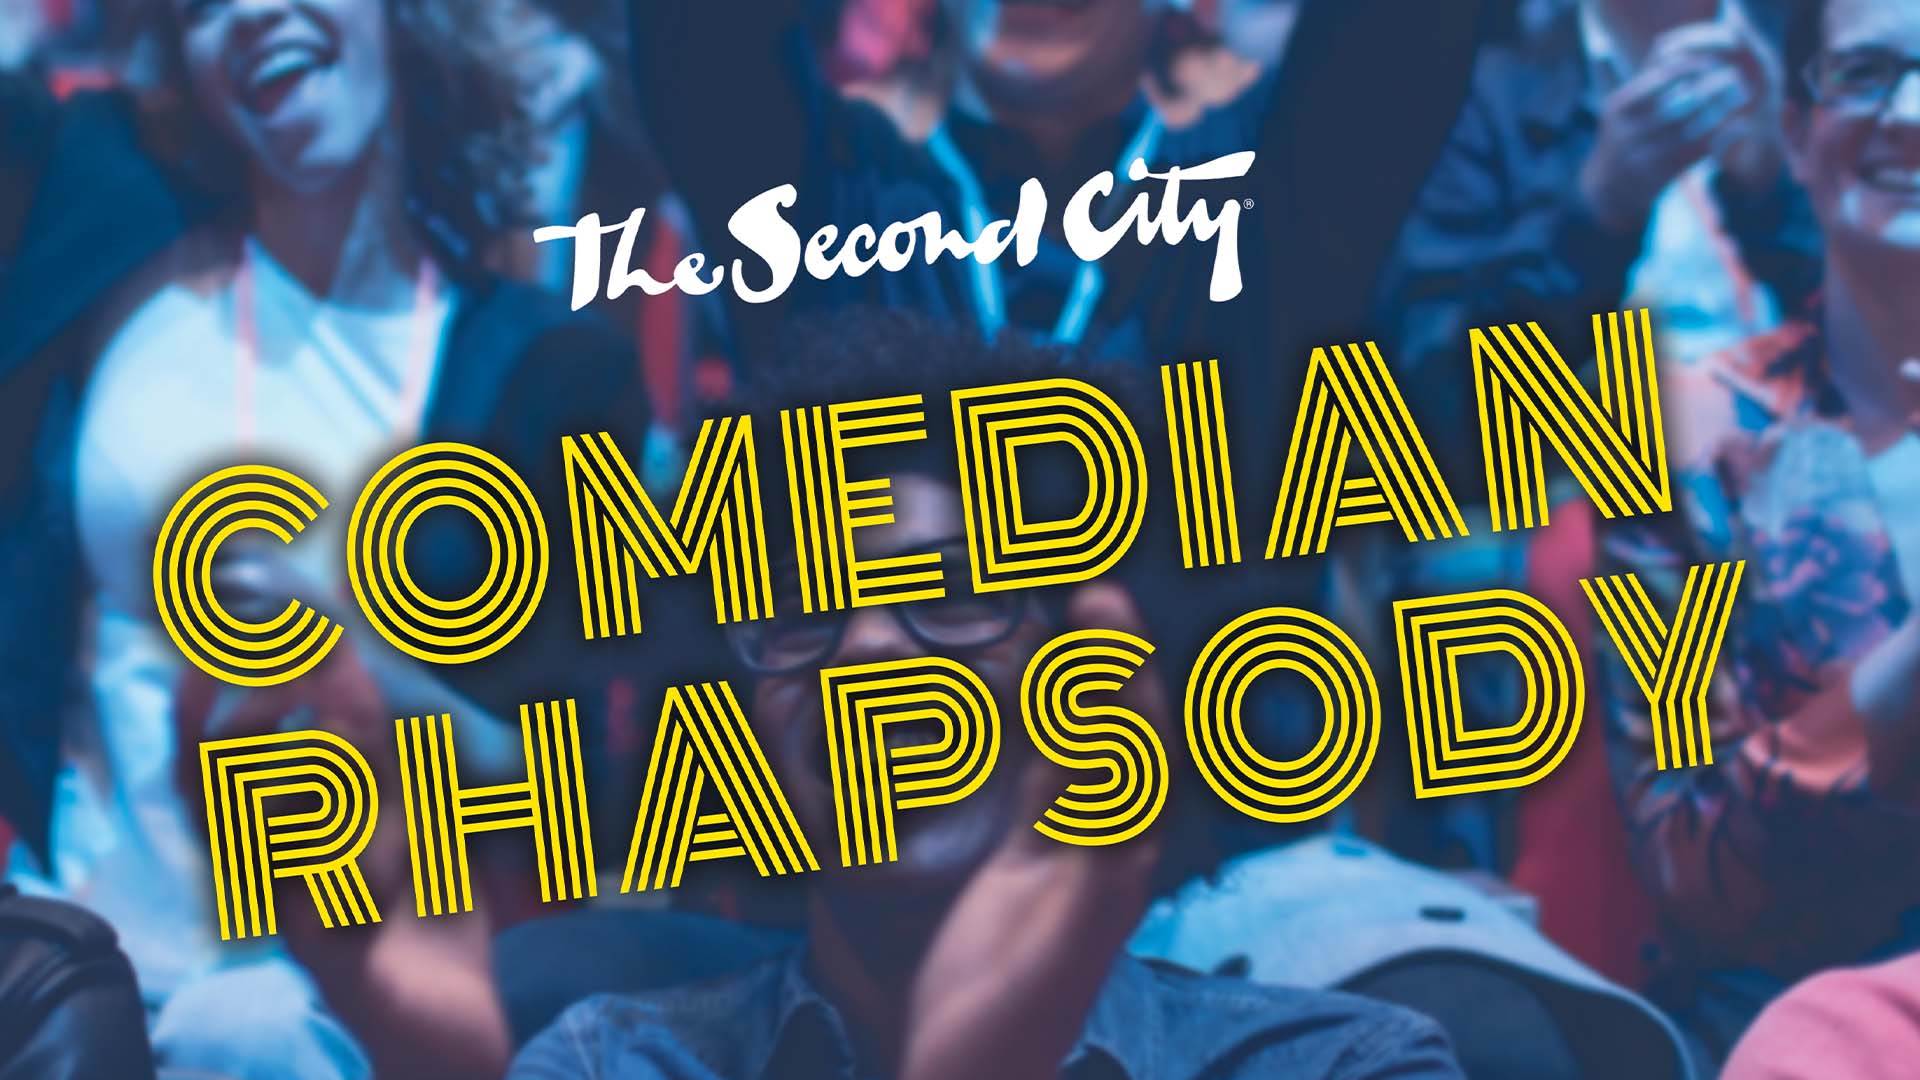 A close up, blurred image of an audience laughing. Over top of it are the words "The Second City: Comedian Rhapsody". "The Second City" is in white and cursive. "Comedian Rhapsody" is yellow, in all caps, and in a marquee-style font.